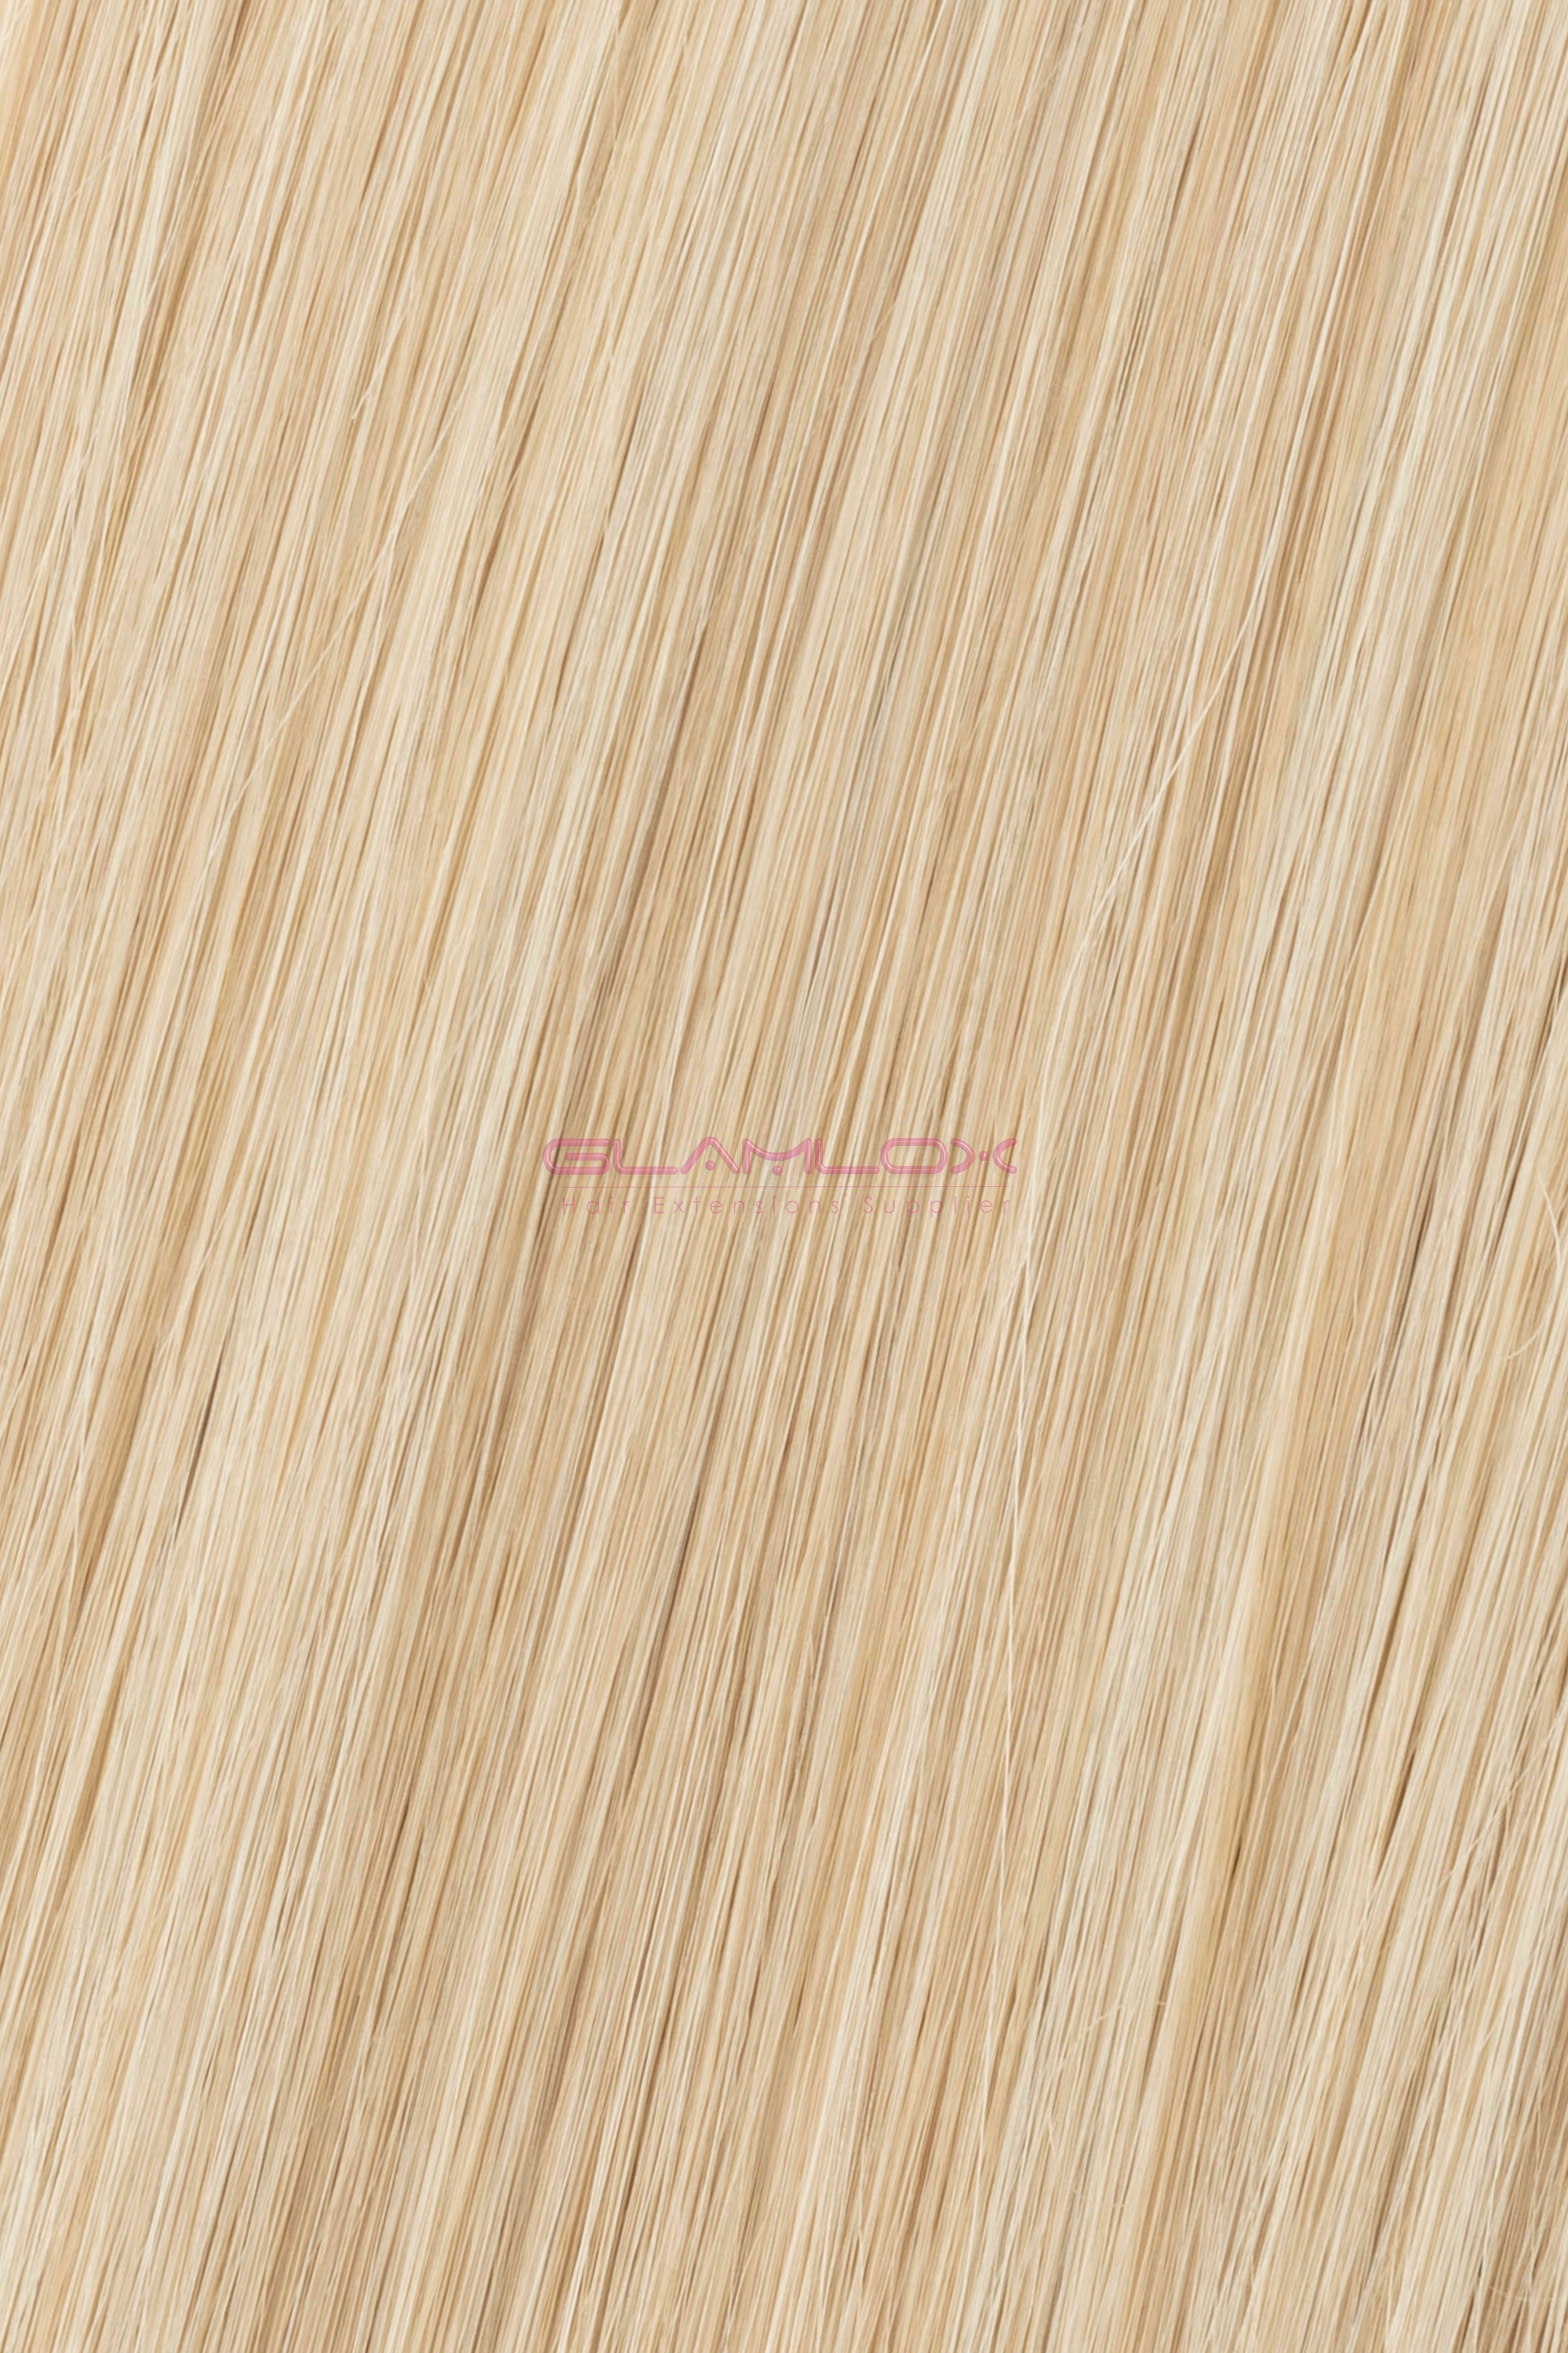 28 - 30" Full Weft Hair Extensions - Russian Mongolian Double Drawn Remy Human Hair